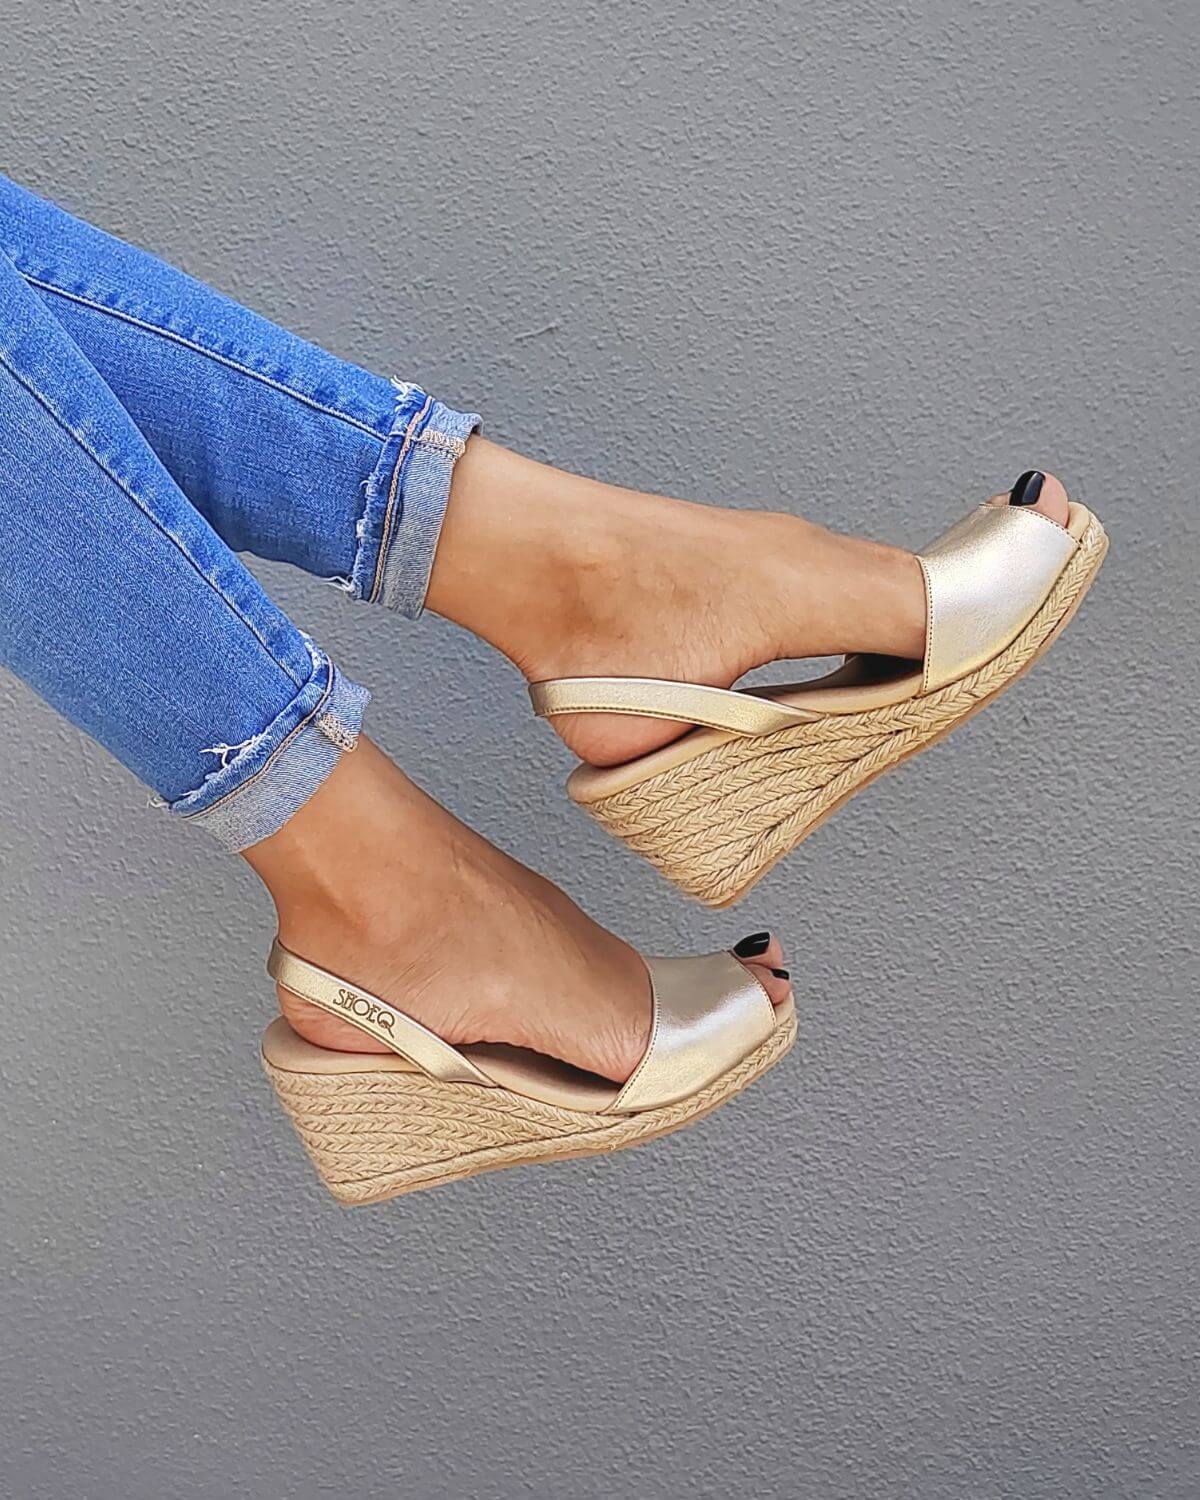 Classic Espadrille Wedge in Champagne Metallic | Shoeq | Sandals for women